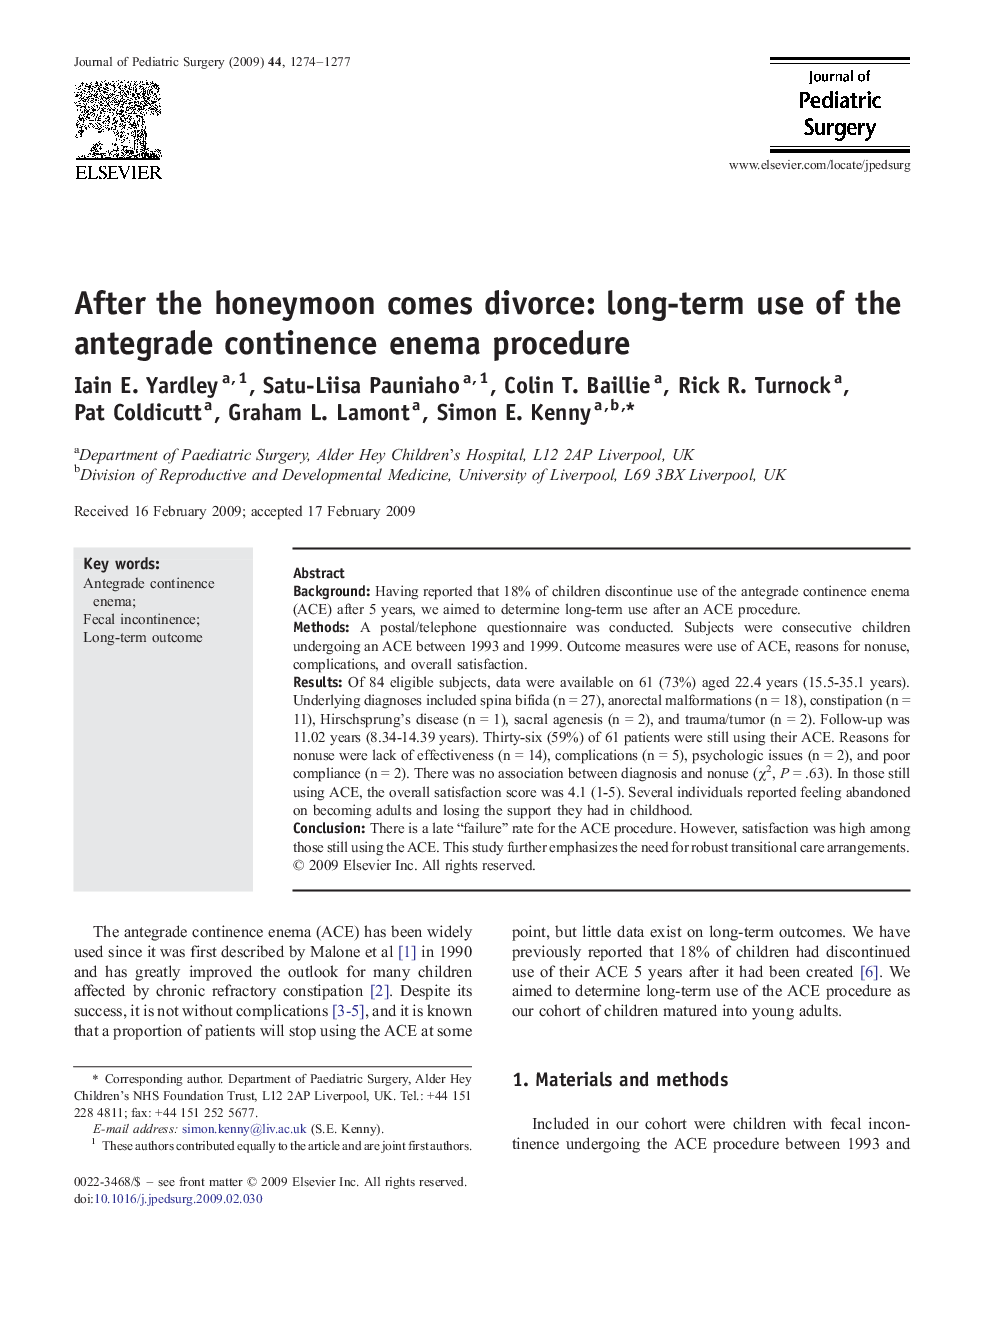 After the honeymoon comes divorce: long-term use of the antegrade continence enema procedure